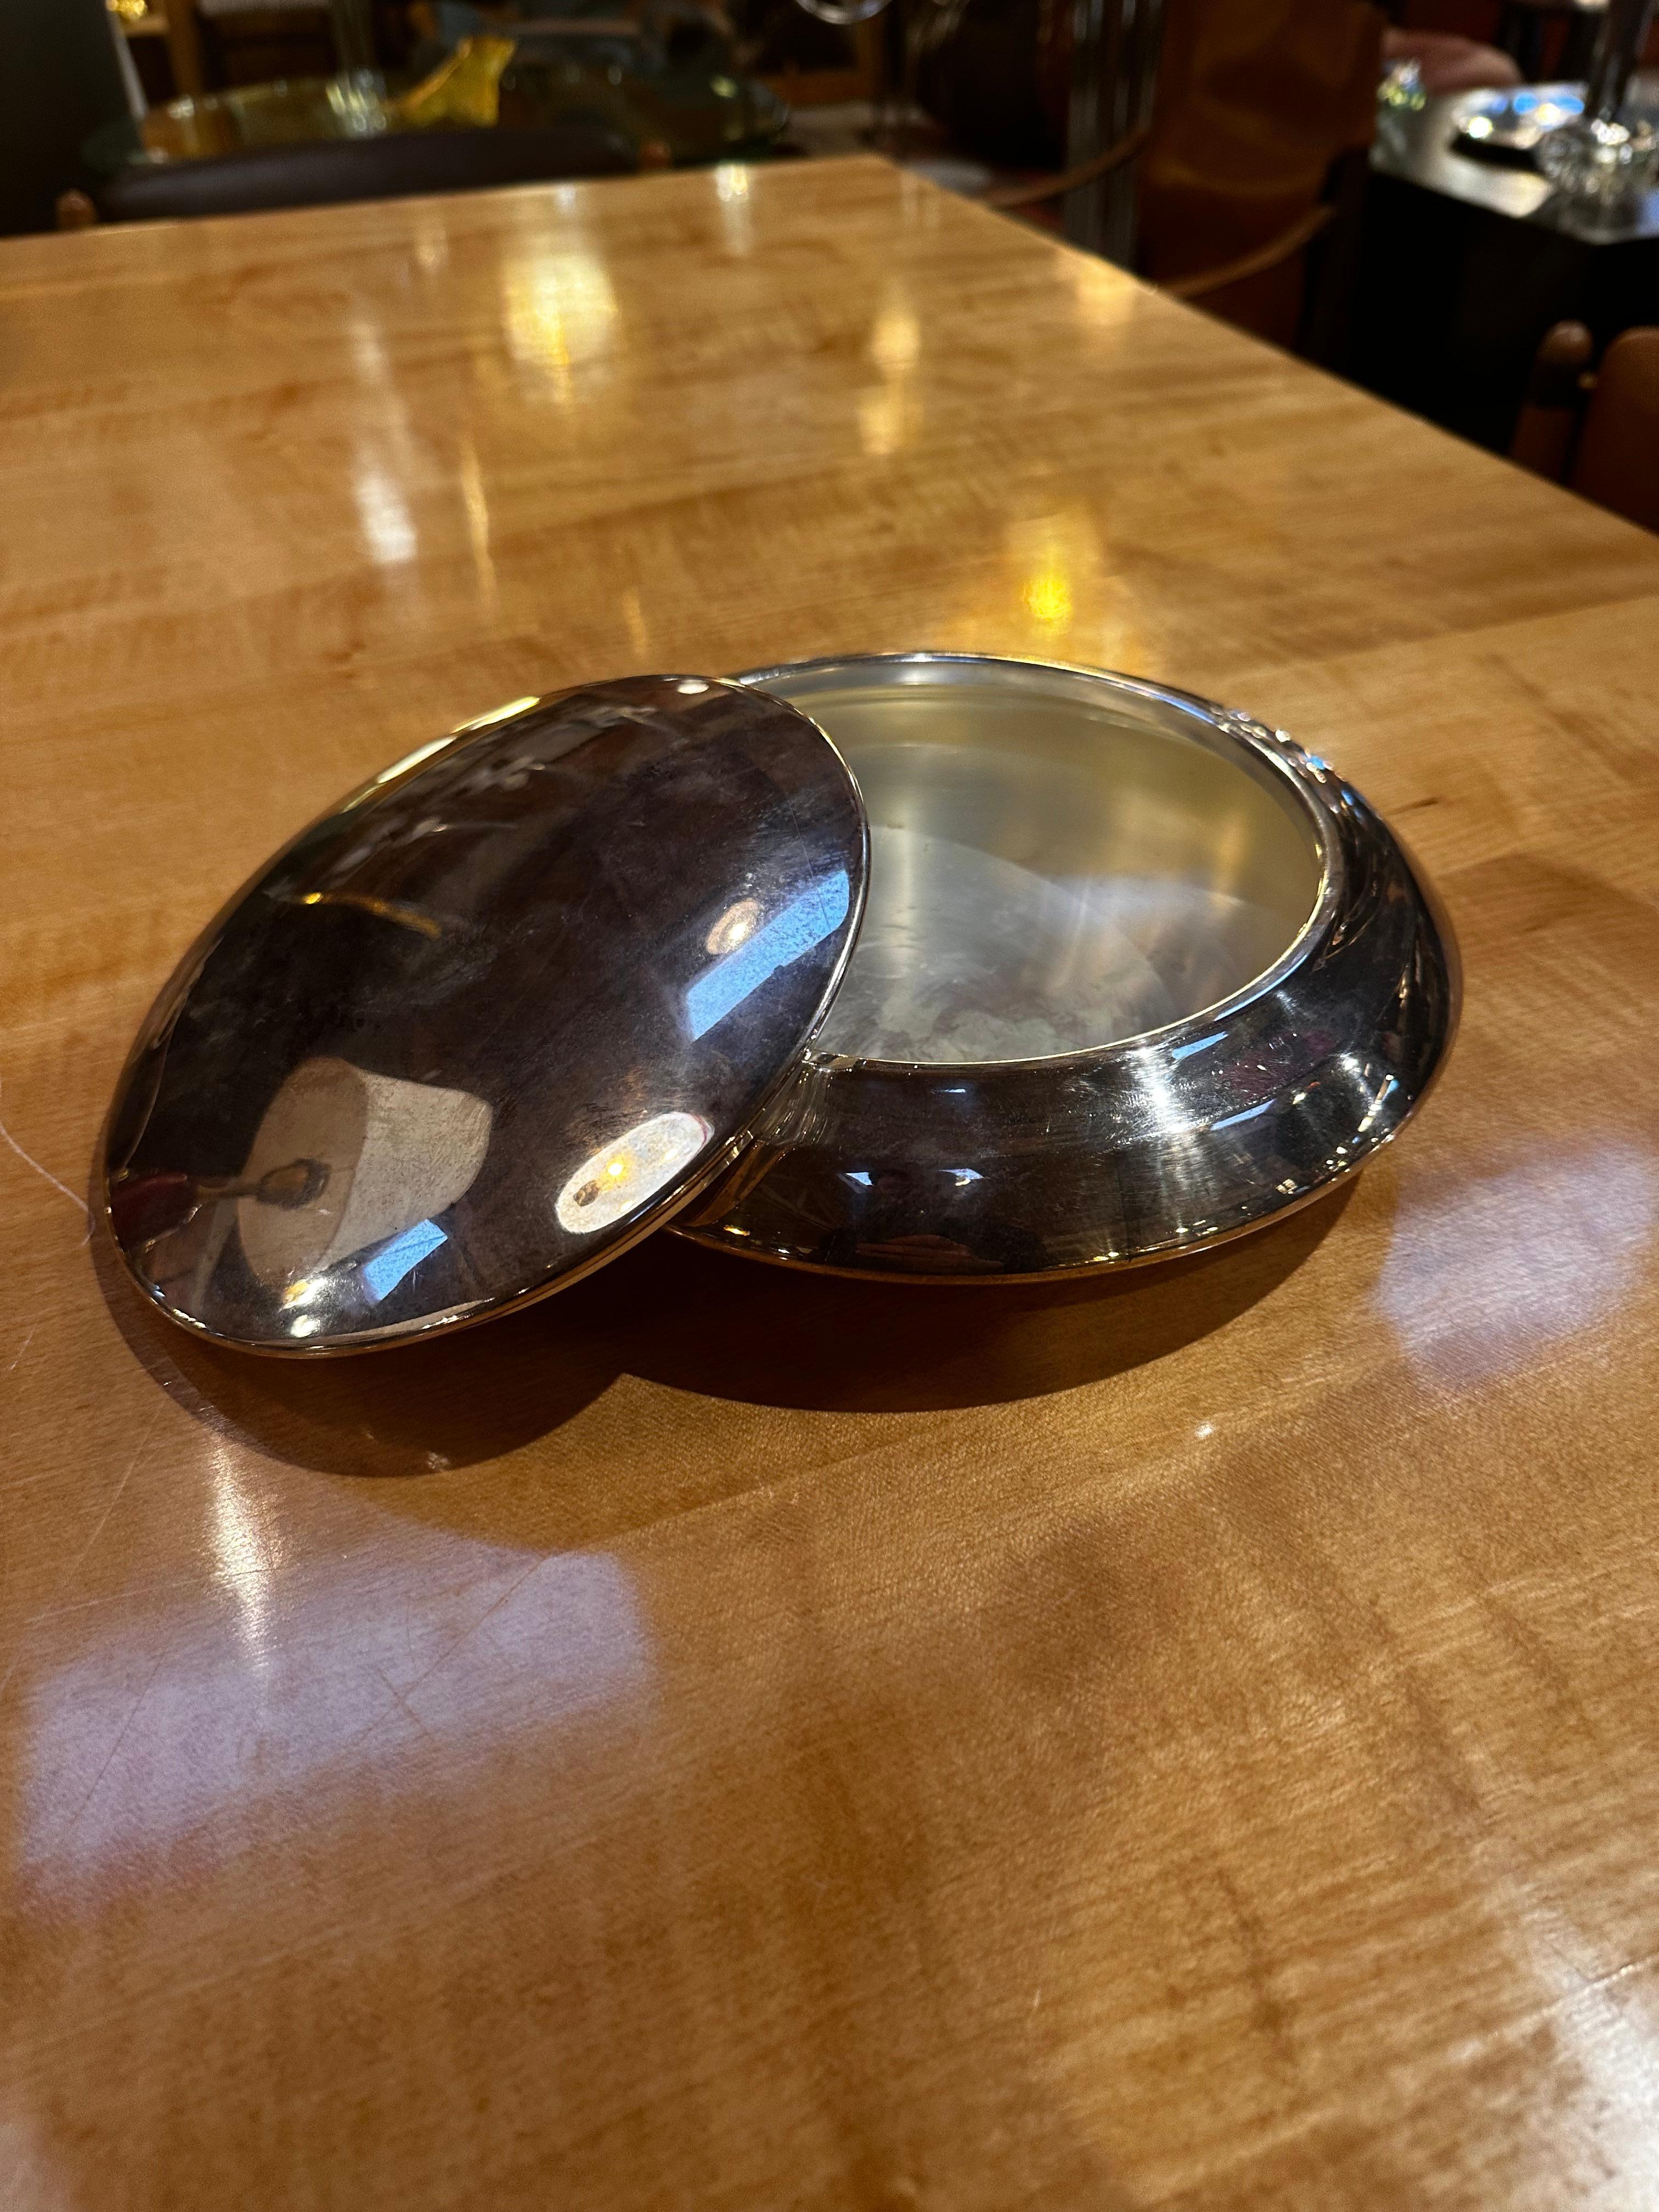 A Mid-Century Italian Decorative Center Bowl from the 1960s is a stylish and iconic piece featuring the design characteristics of that era. Crafted with a blend of form and function, this bowl likely showcases clean lines, organic shapes, and a